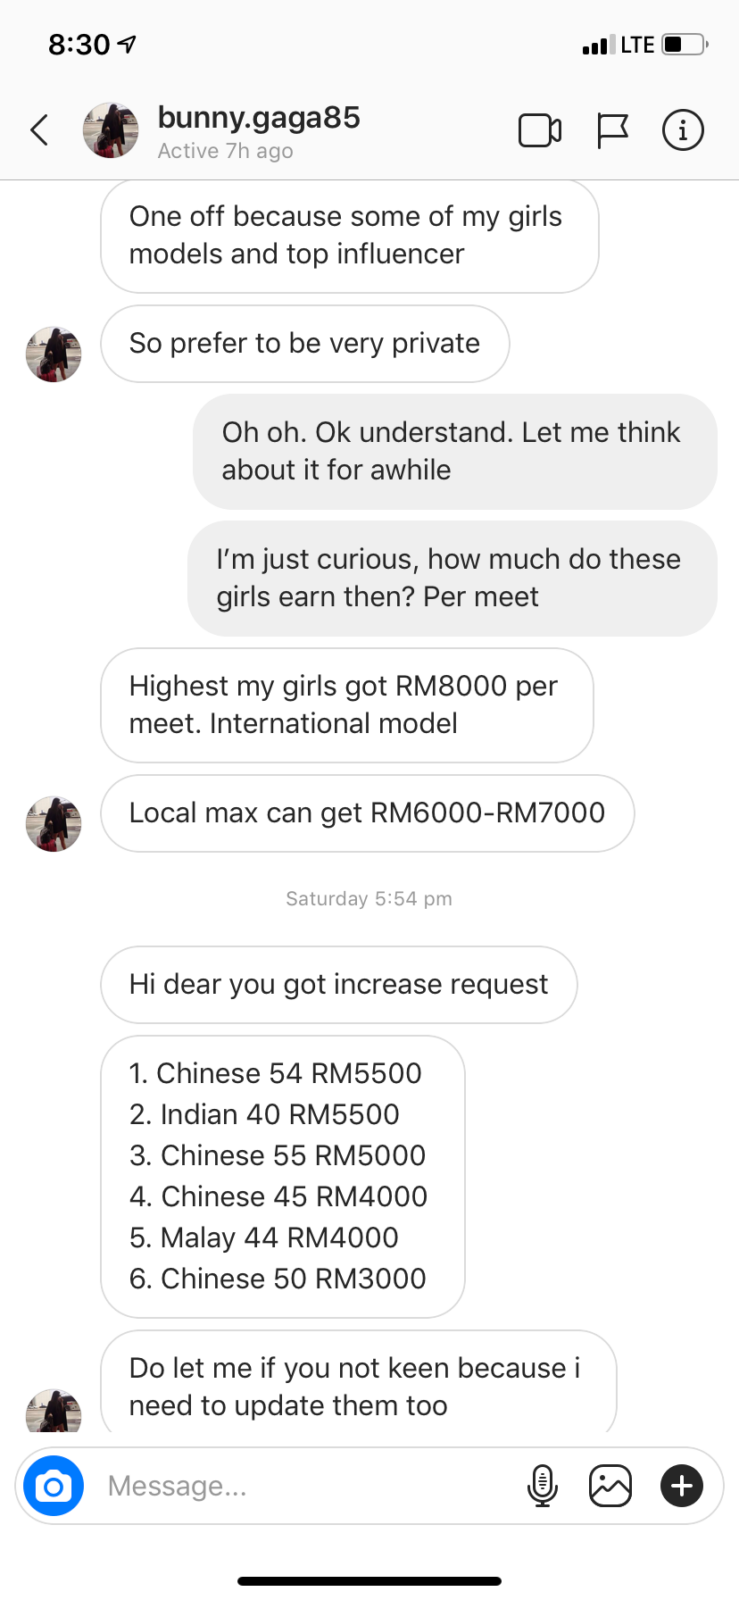 A Sugar Daddy Agent Messaged Me on Instagram and Said I Could Earn RM40,000 A Month - WORLD OF BUZZ 2